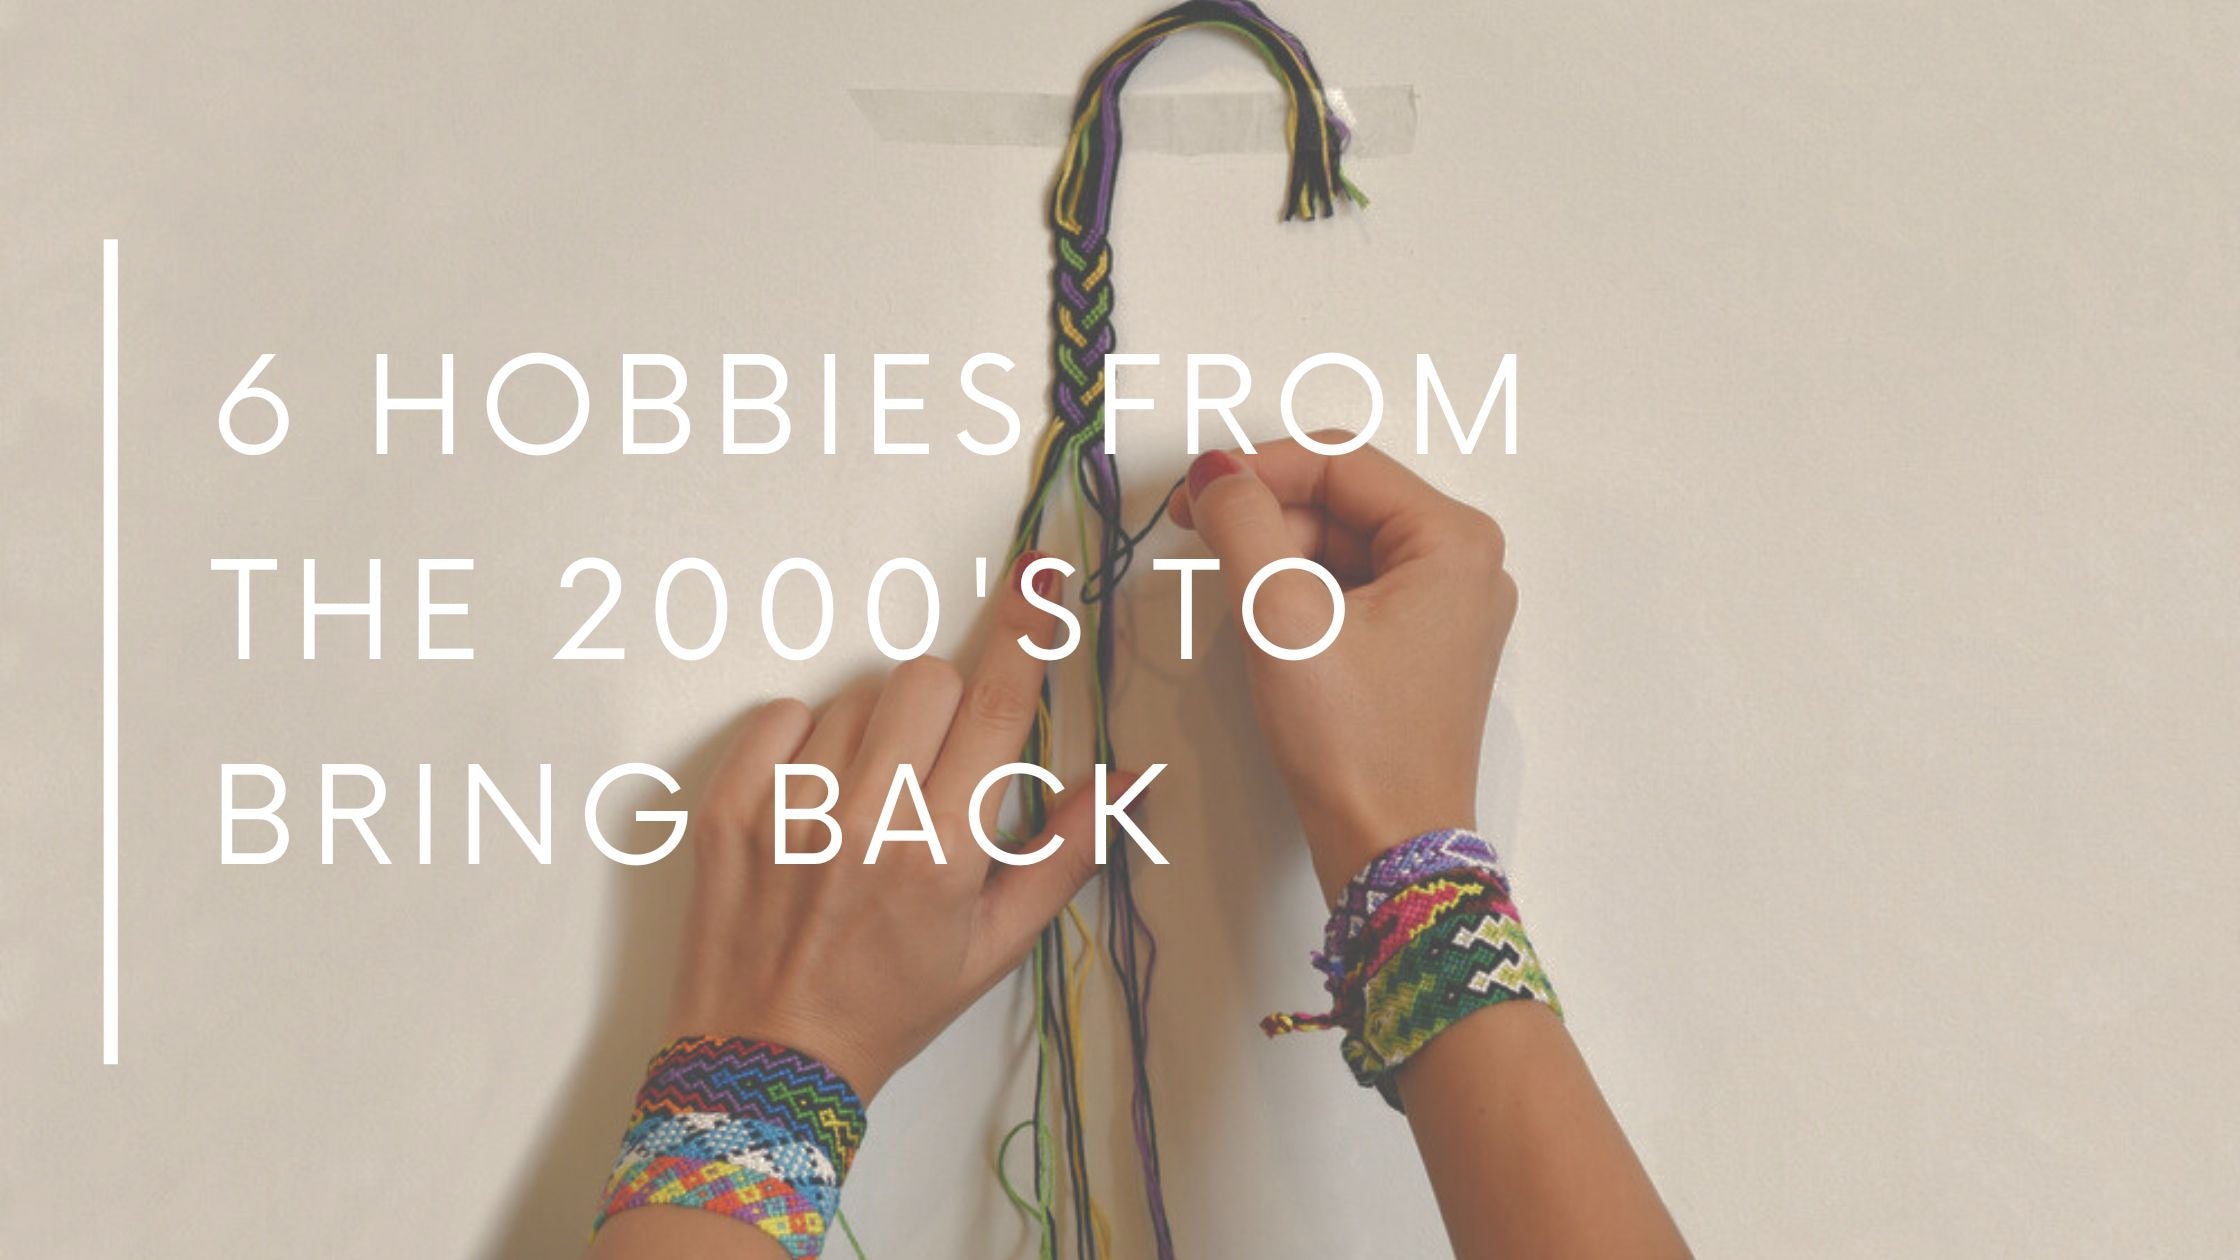 6 Hobbies From the 2000s to Bring Back